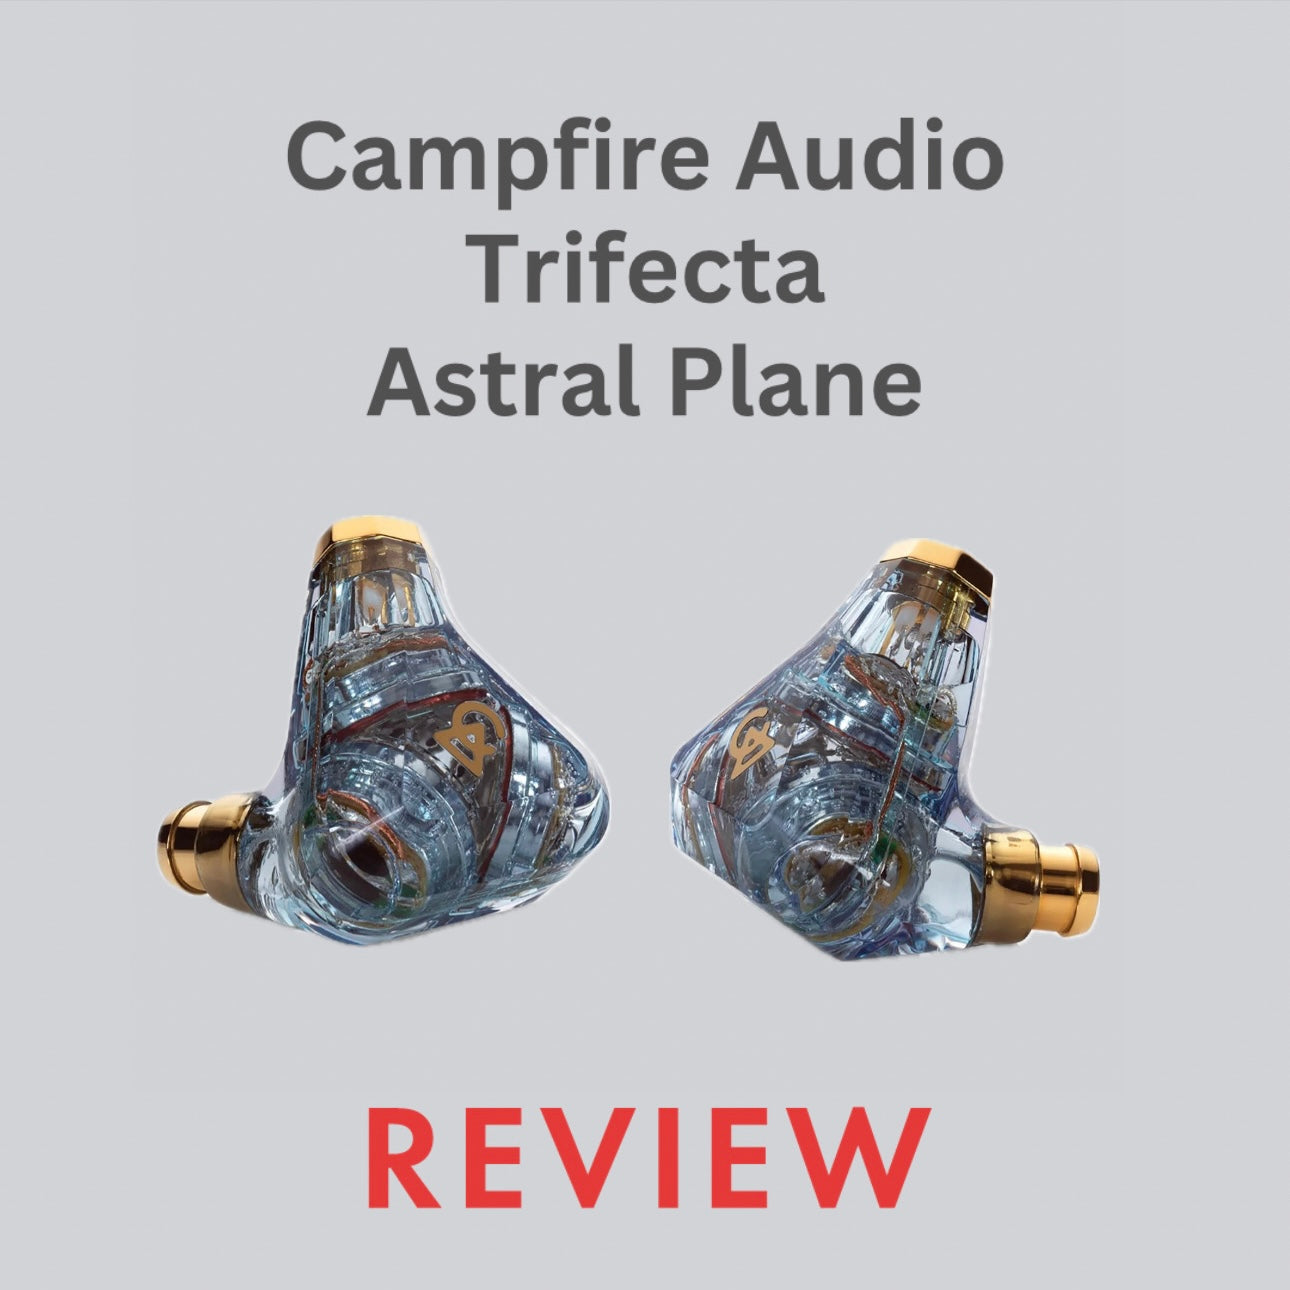 Campfire Audio Trifecta Astral Plane Review